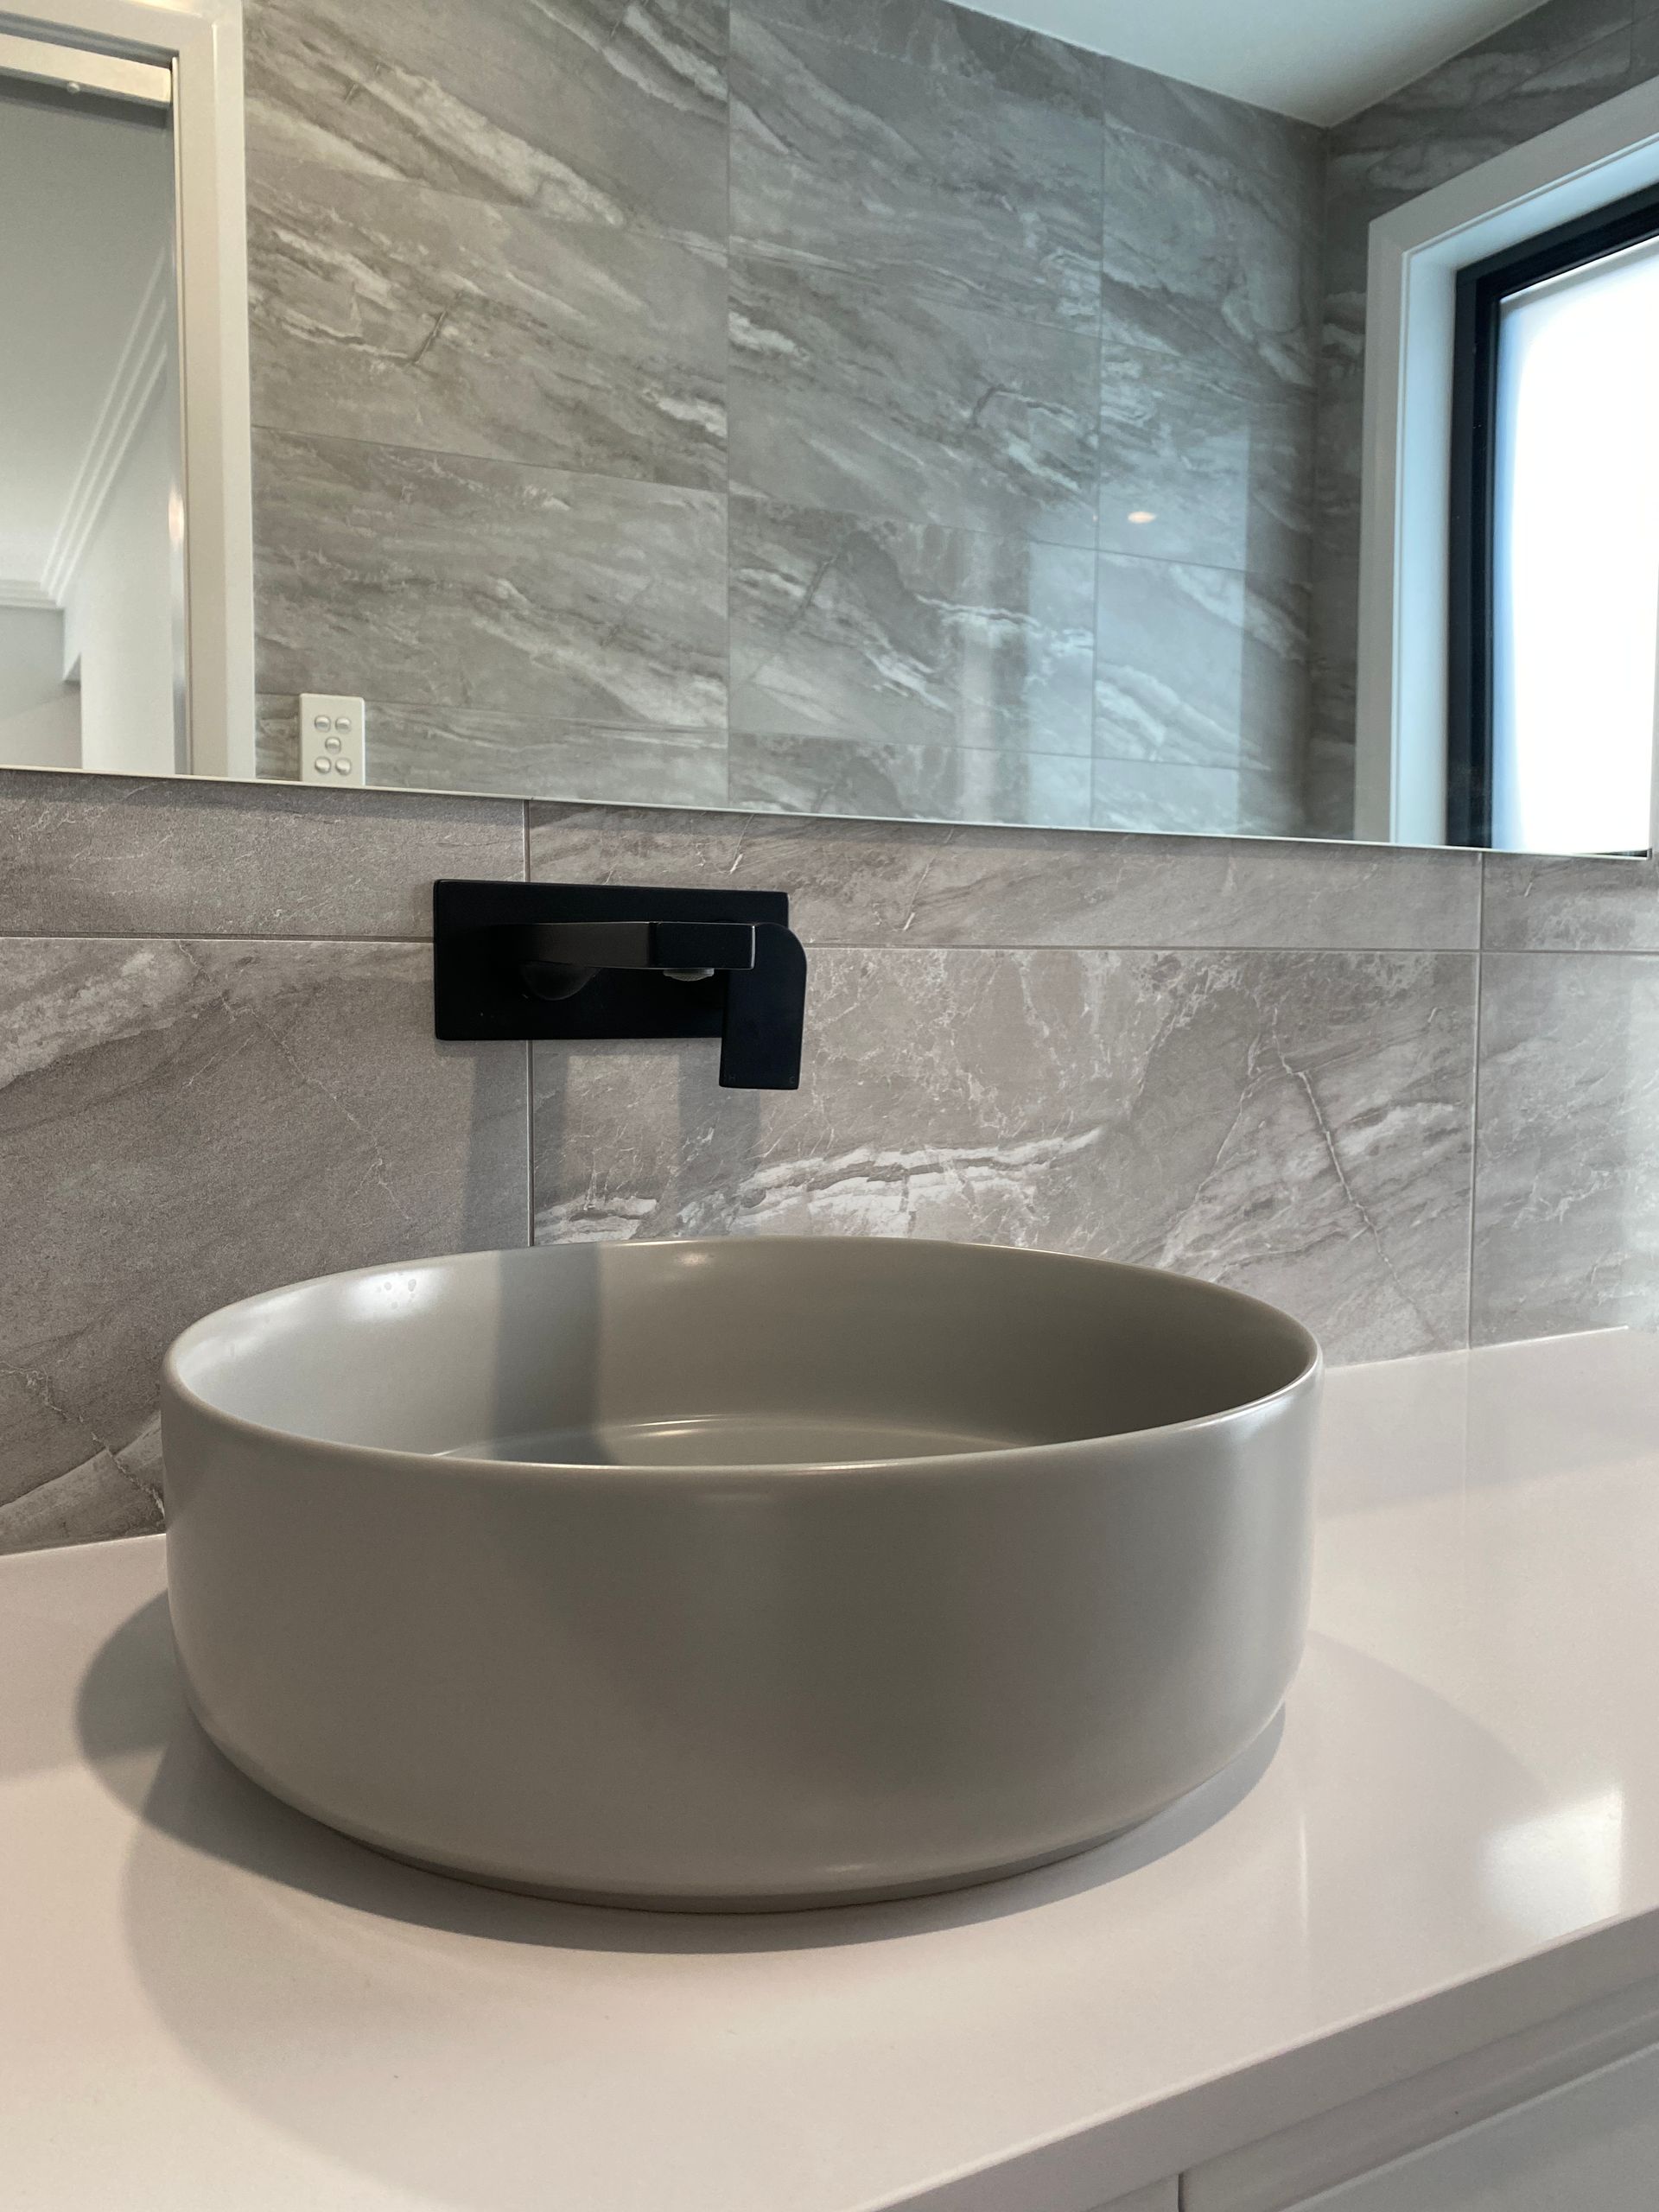 Washbasin and Modern style Faucet — Kitchen Renovations in Dubbo, QLD